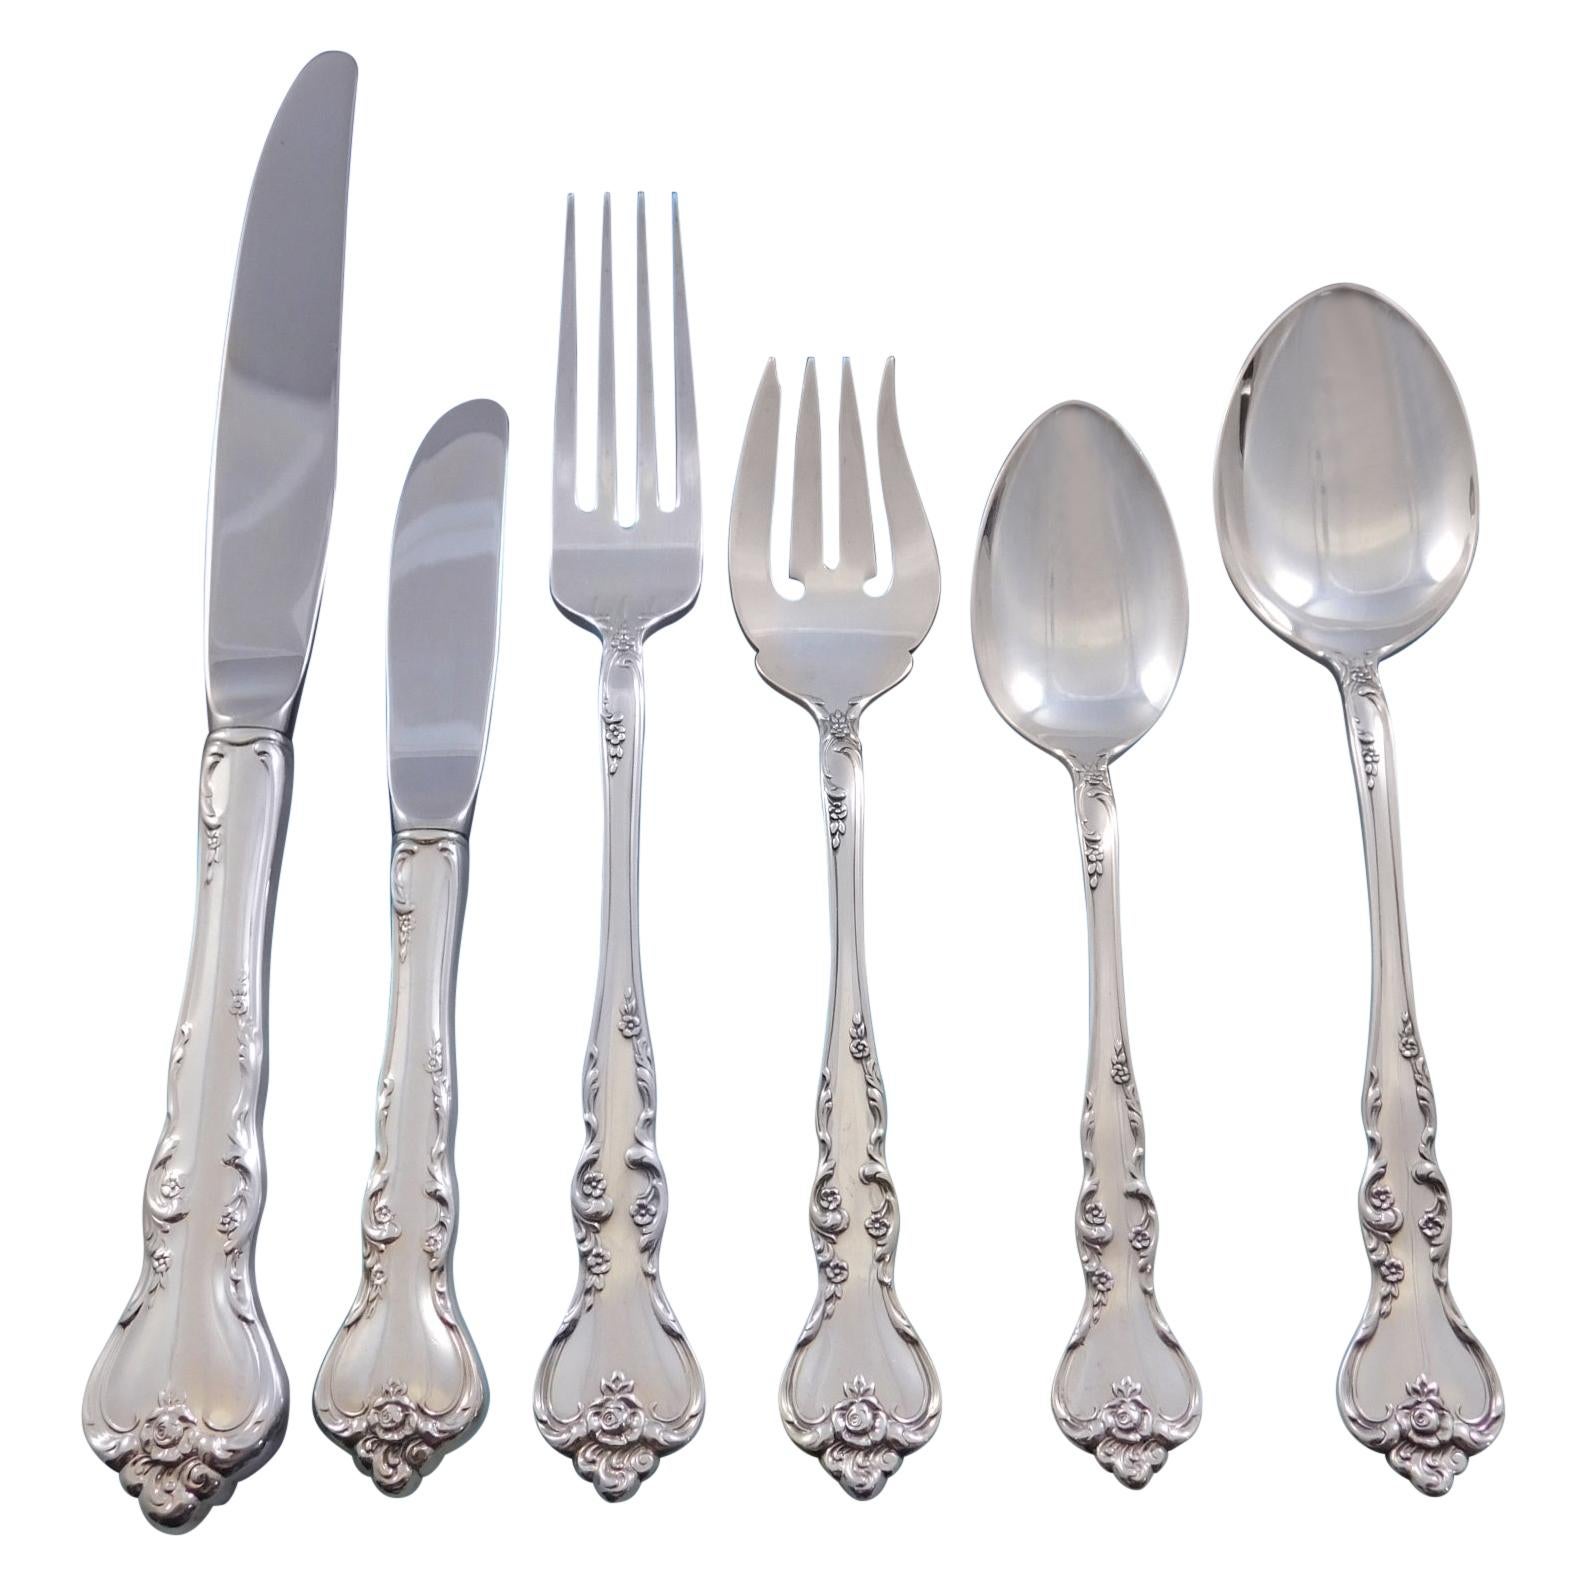 Savannah by Reed & Barton Sterling Silver Flatware Service for 16 Set 104 Pieces